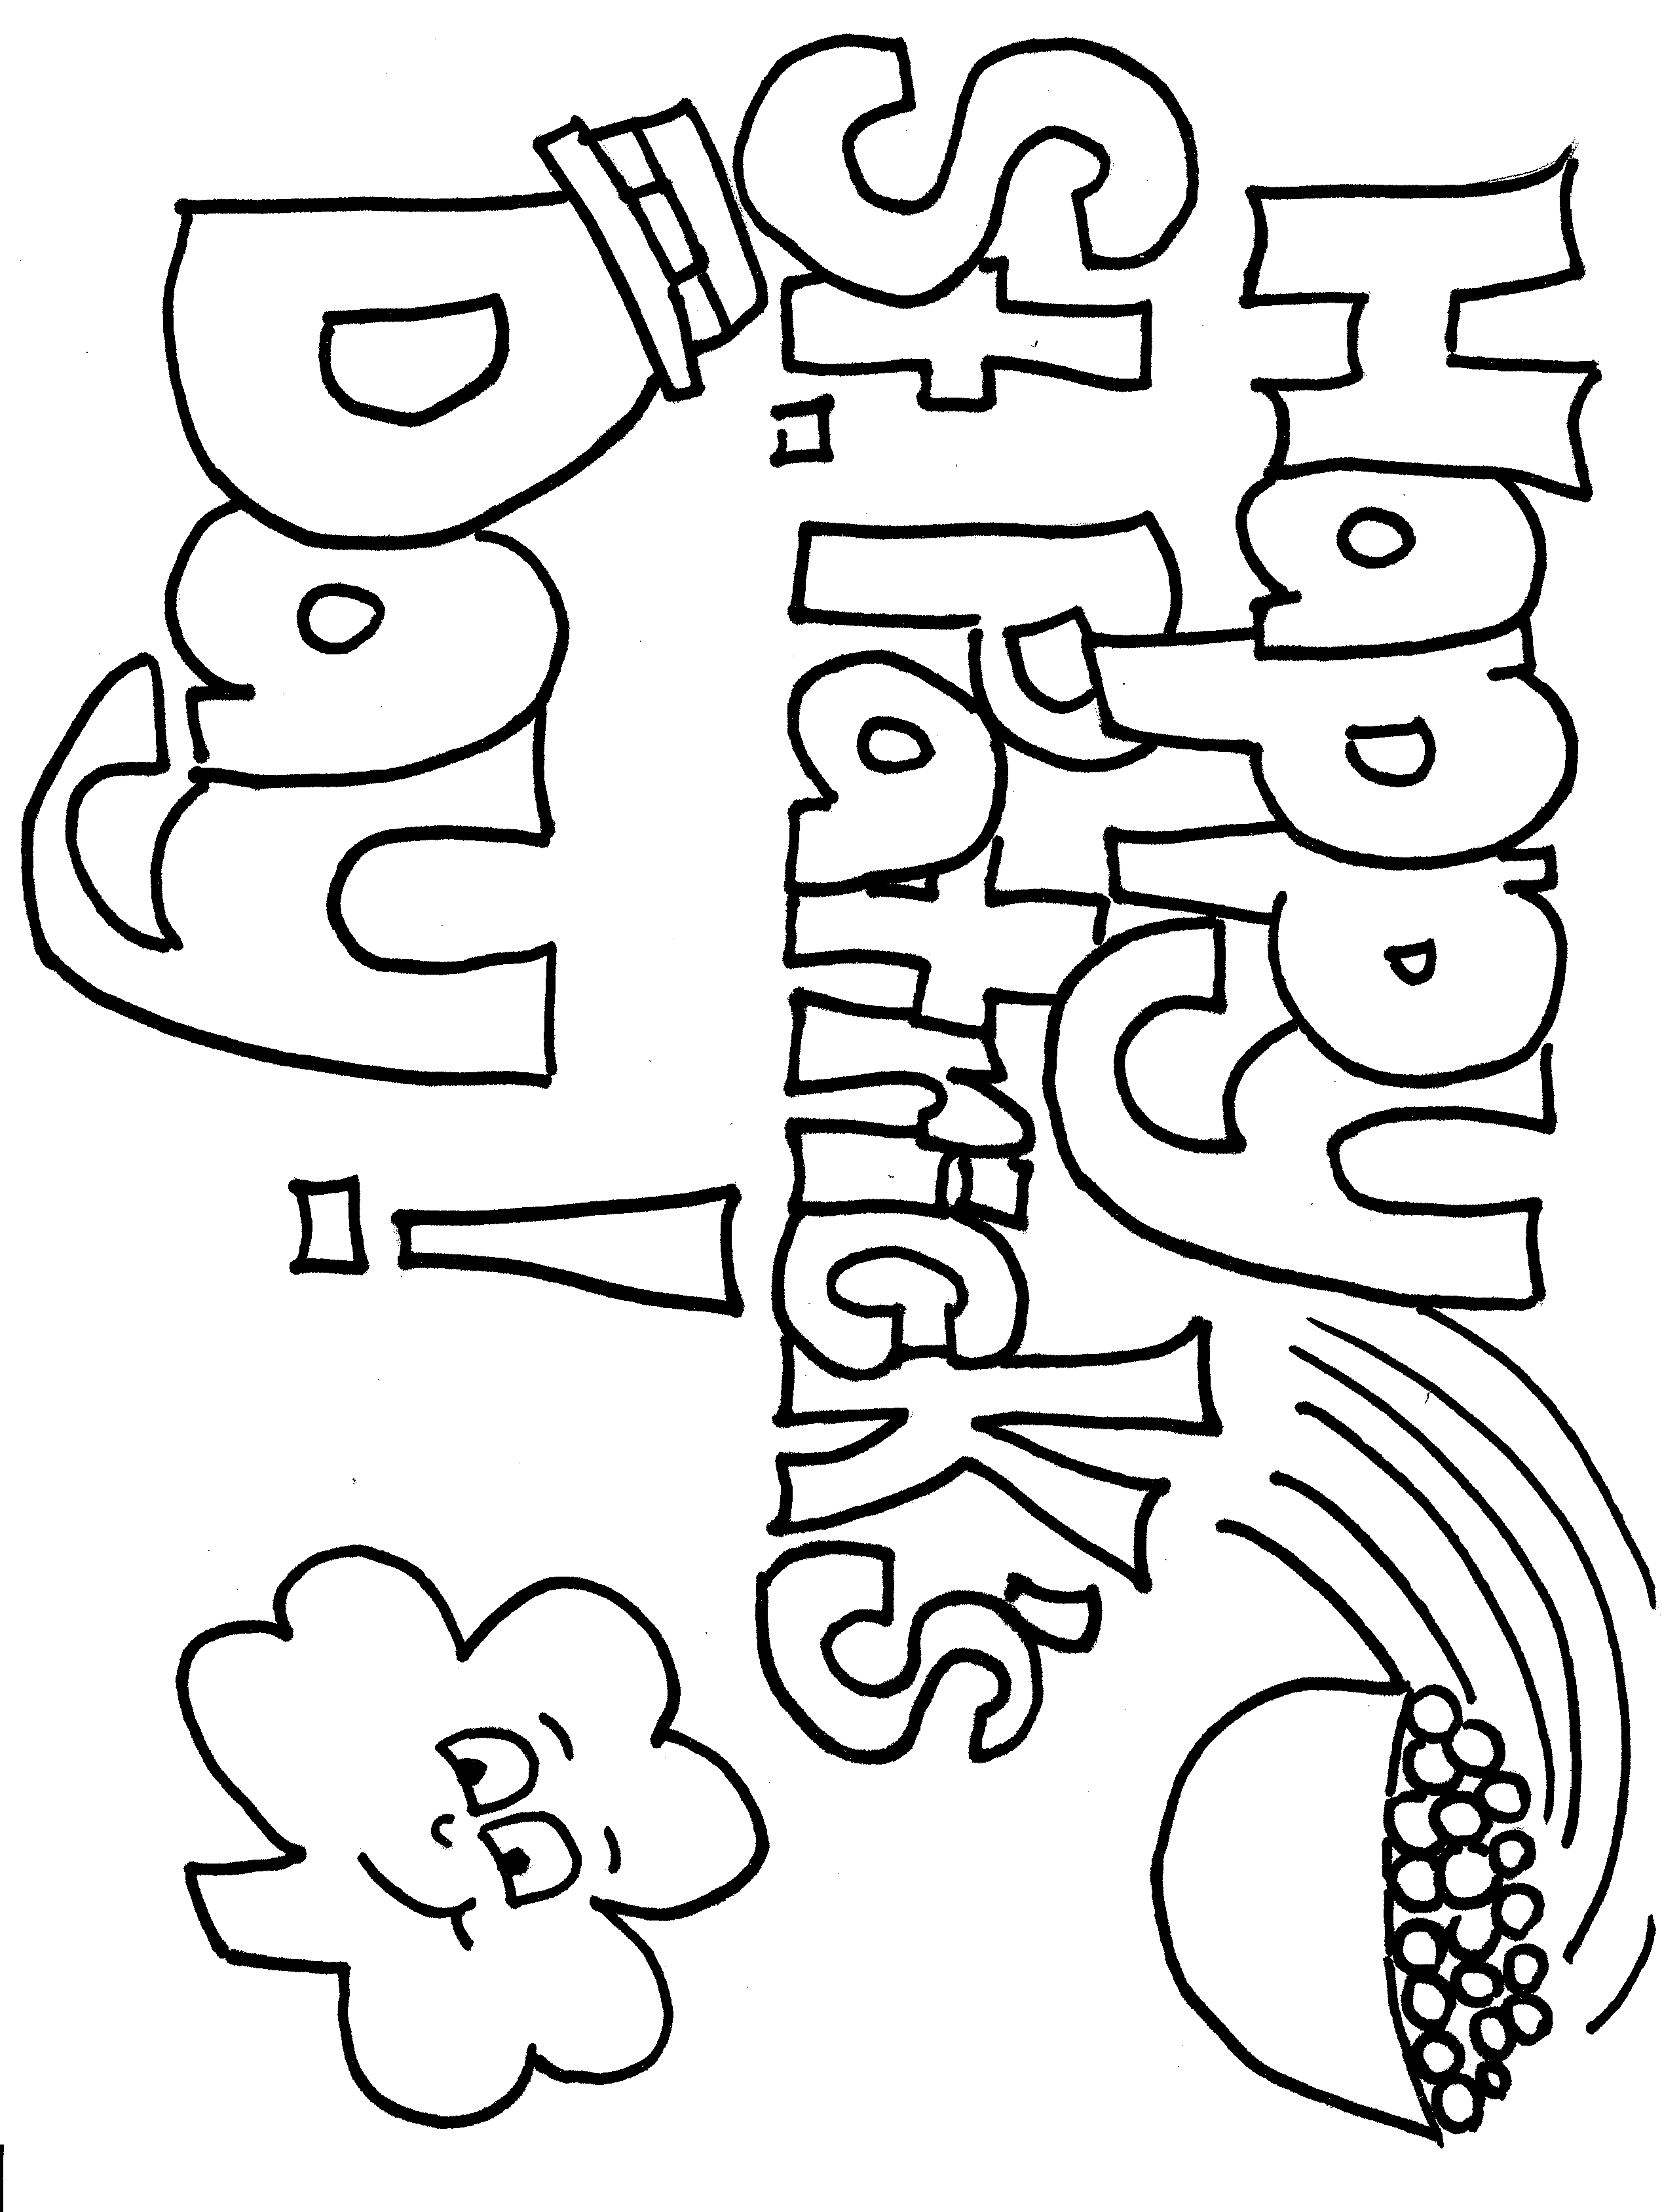 ST PATRICK DAY COLORING PAGES FOR KIDS Coloringpages321 com